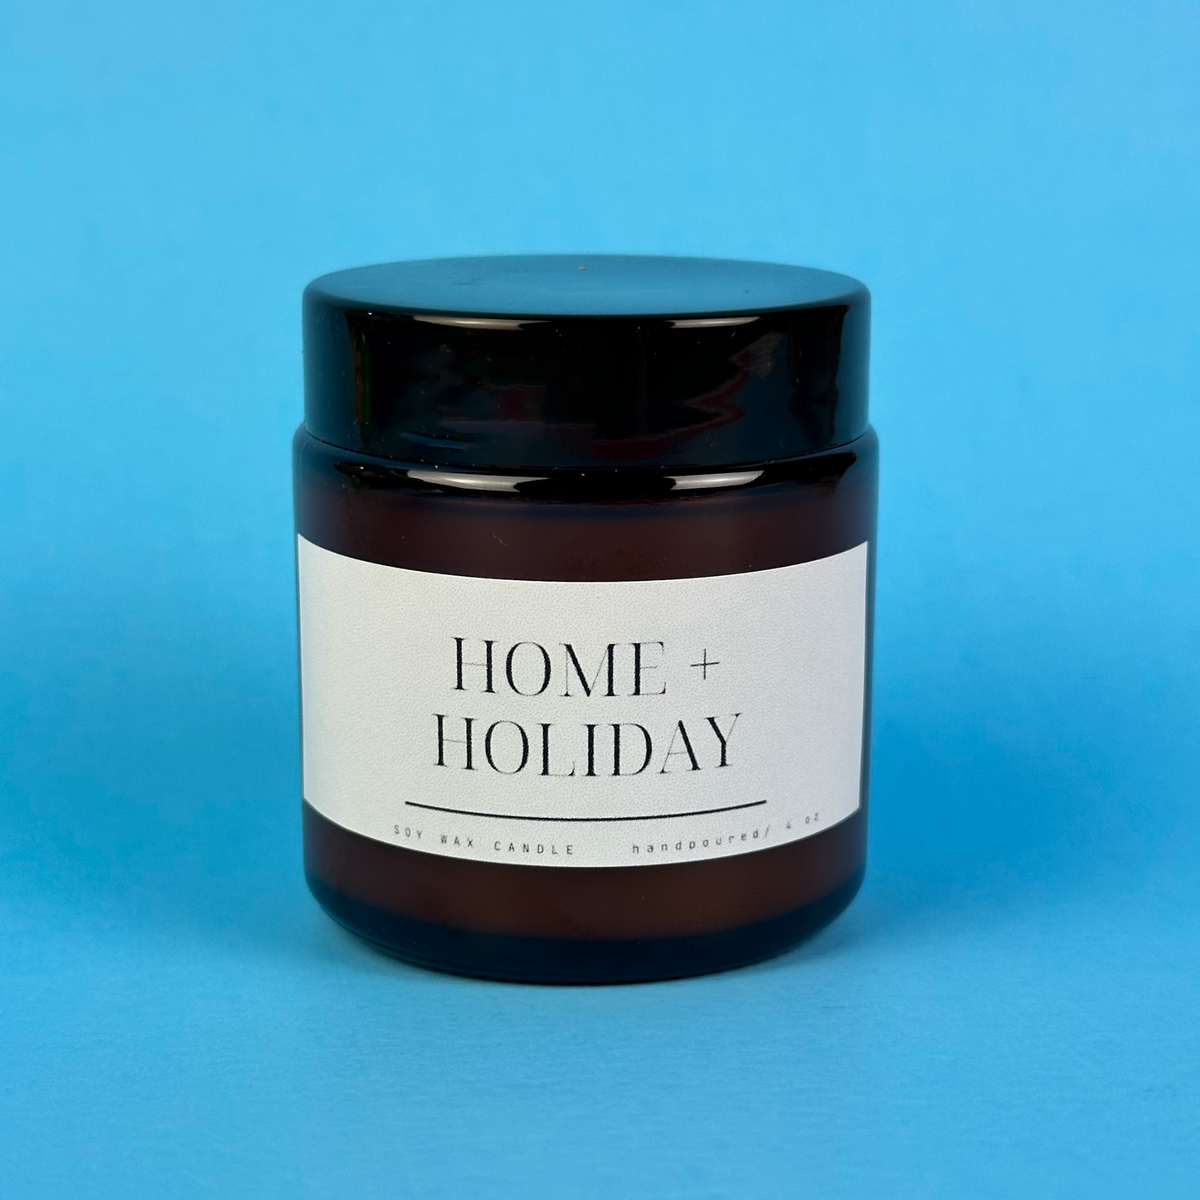 Home + Holiday Candle